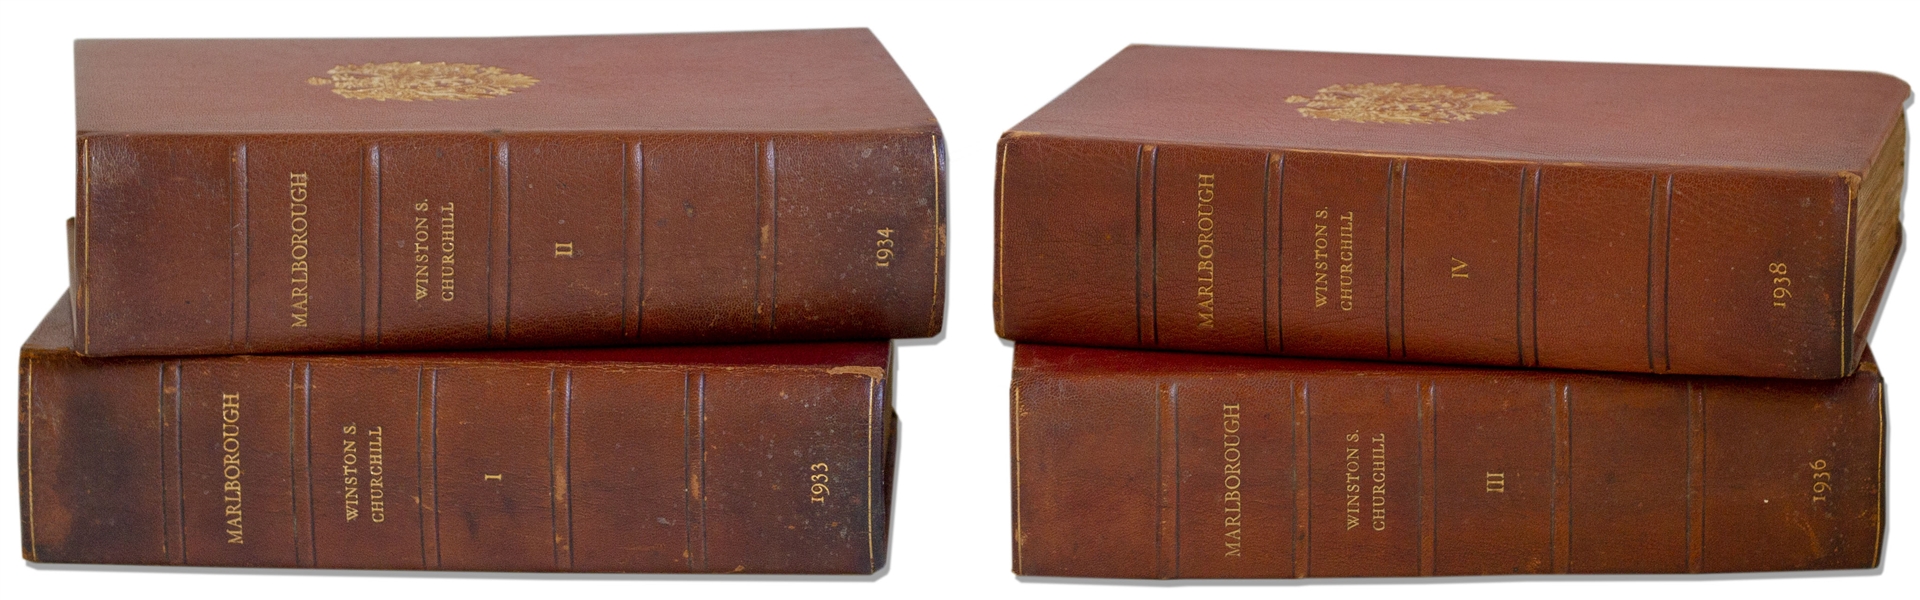 Winston Churchill Signed Limited First Edition of ''Marlborough: His Life and Times'' -- Rare Set Signed by Churchill, One of Only 155 in the Limited Edition, Here in the Original Bindings